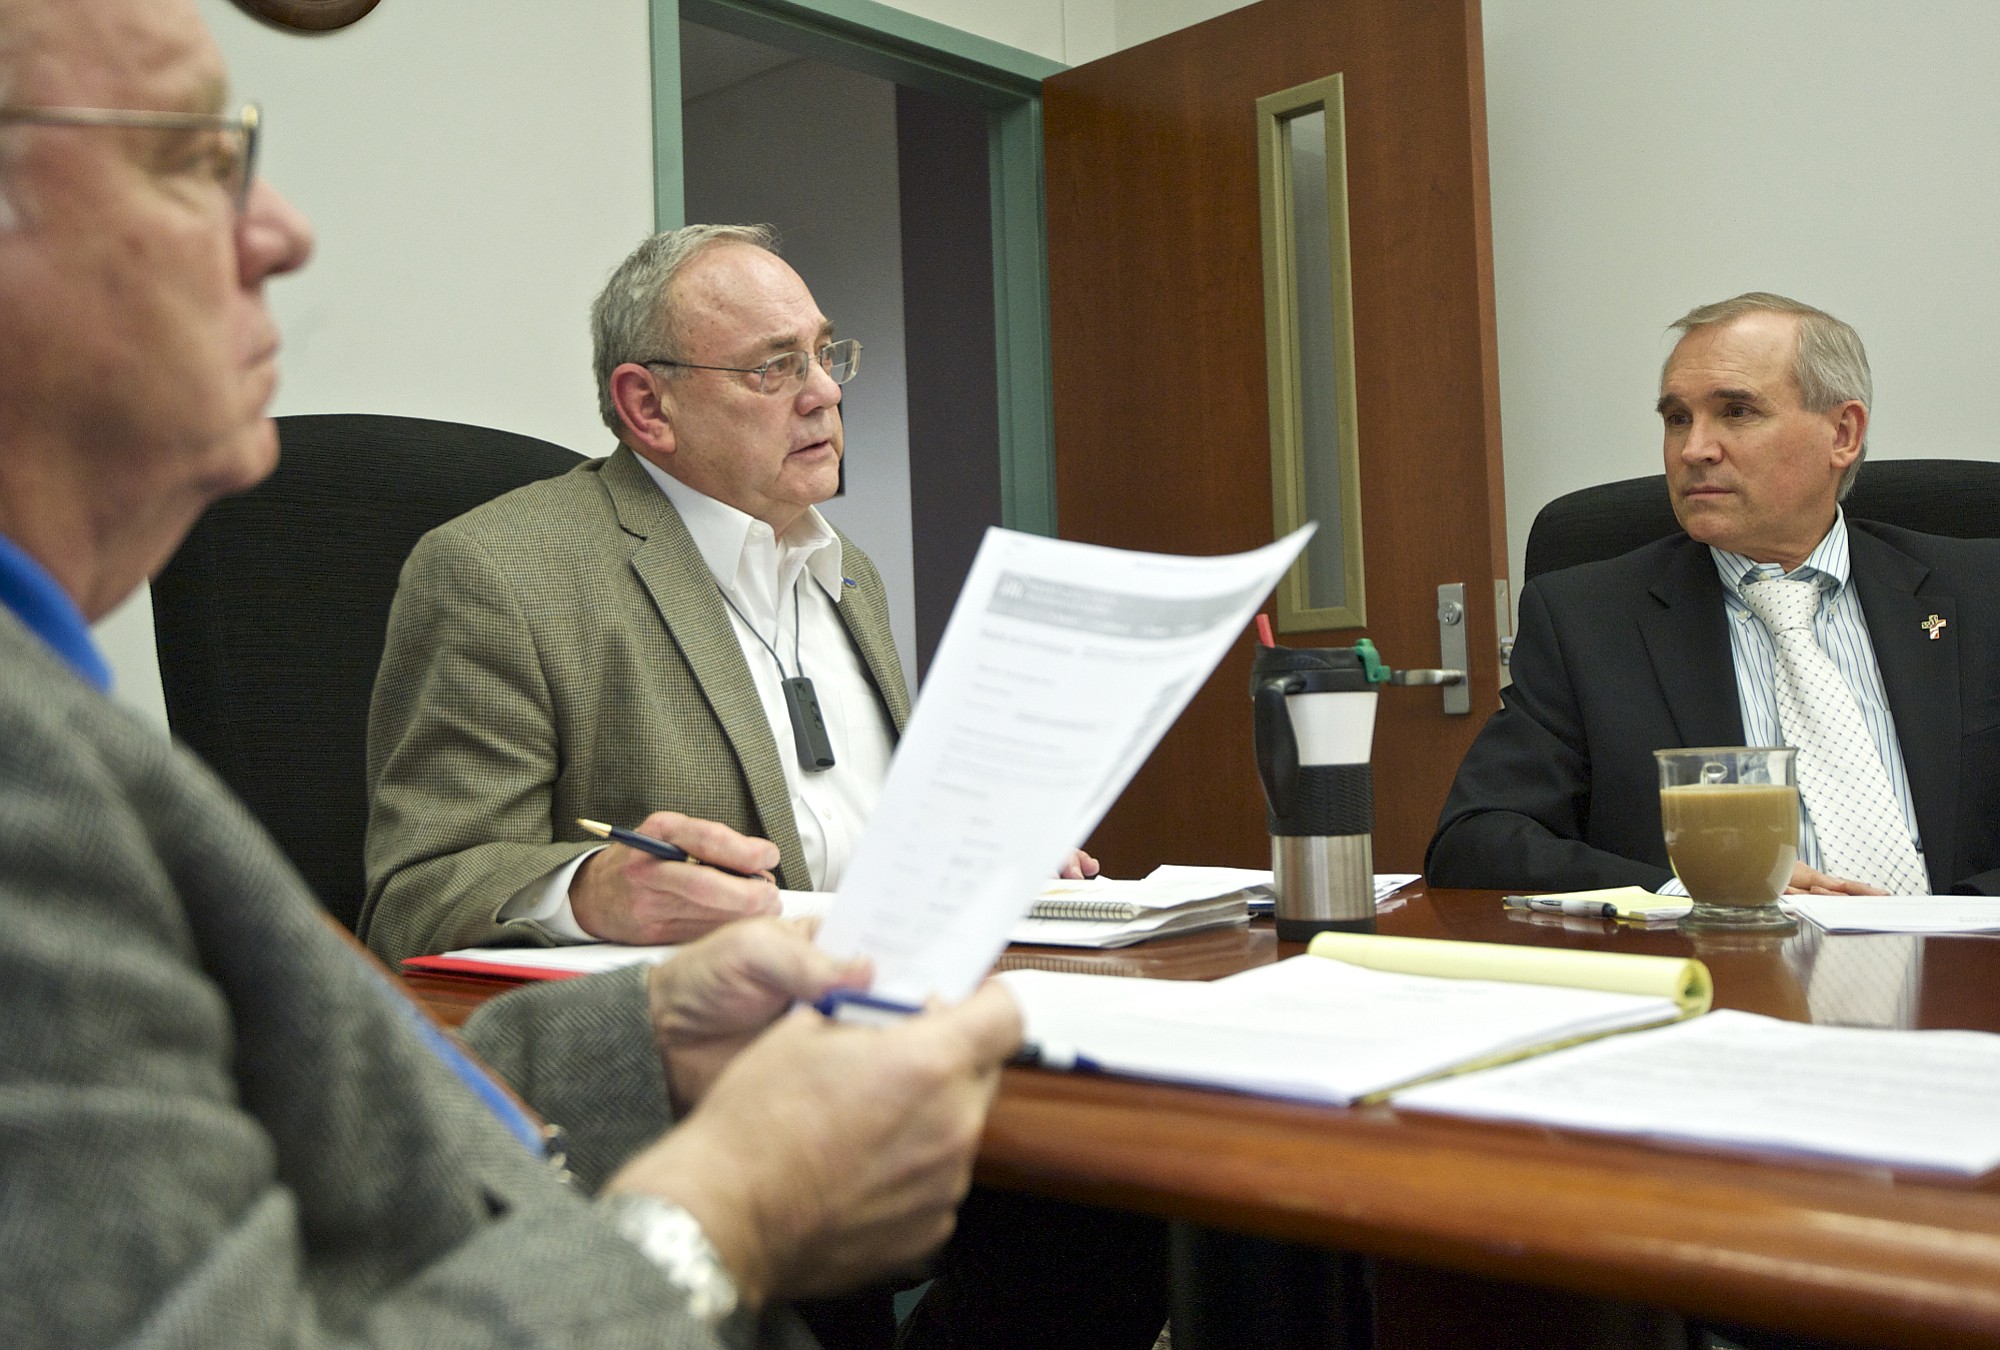 Clark County commissioners, from left, Ed Barnes, Tom Mielke and David Madore, take part in a board time session at the Clark County Public Service Center on Wednesday.